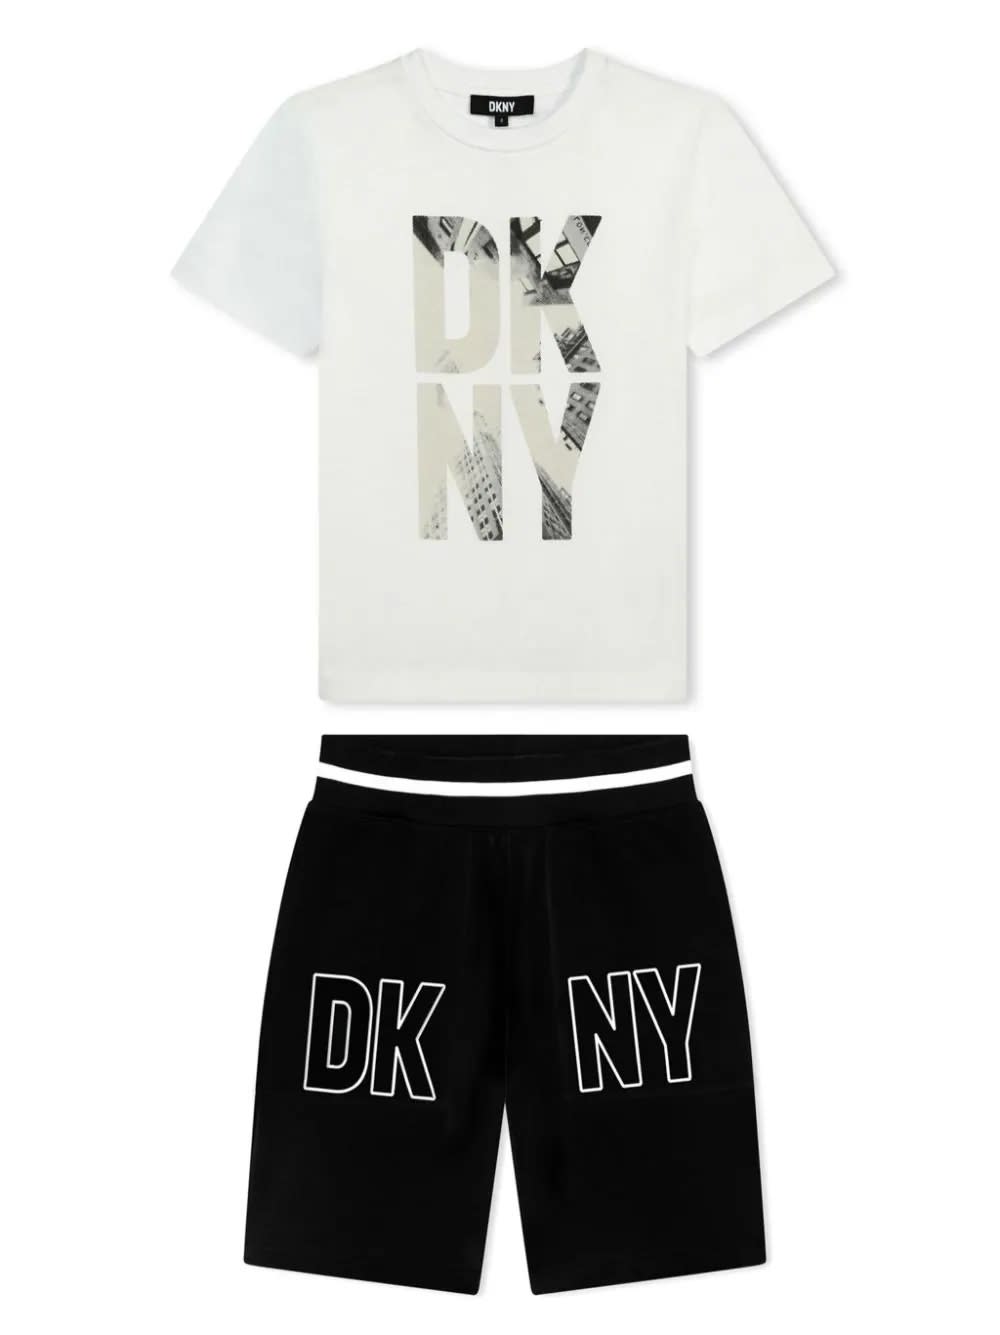 Dkny Kids' T-shirt With Print In White